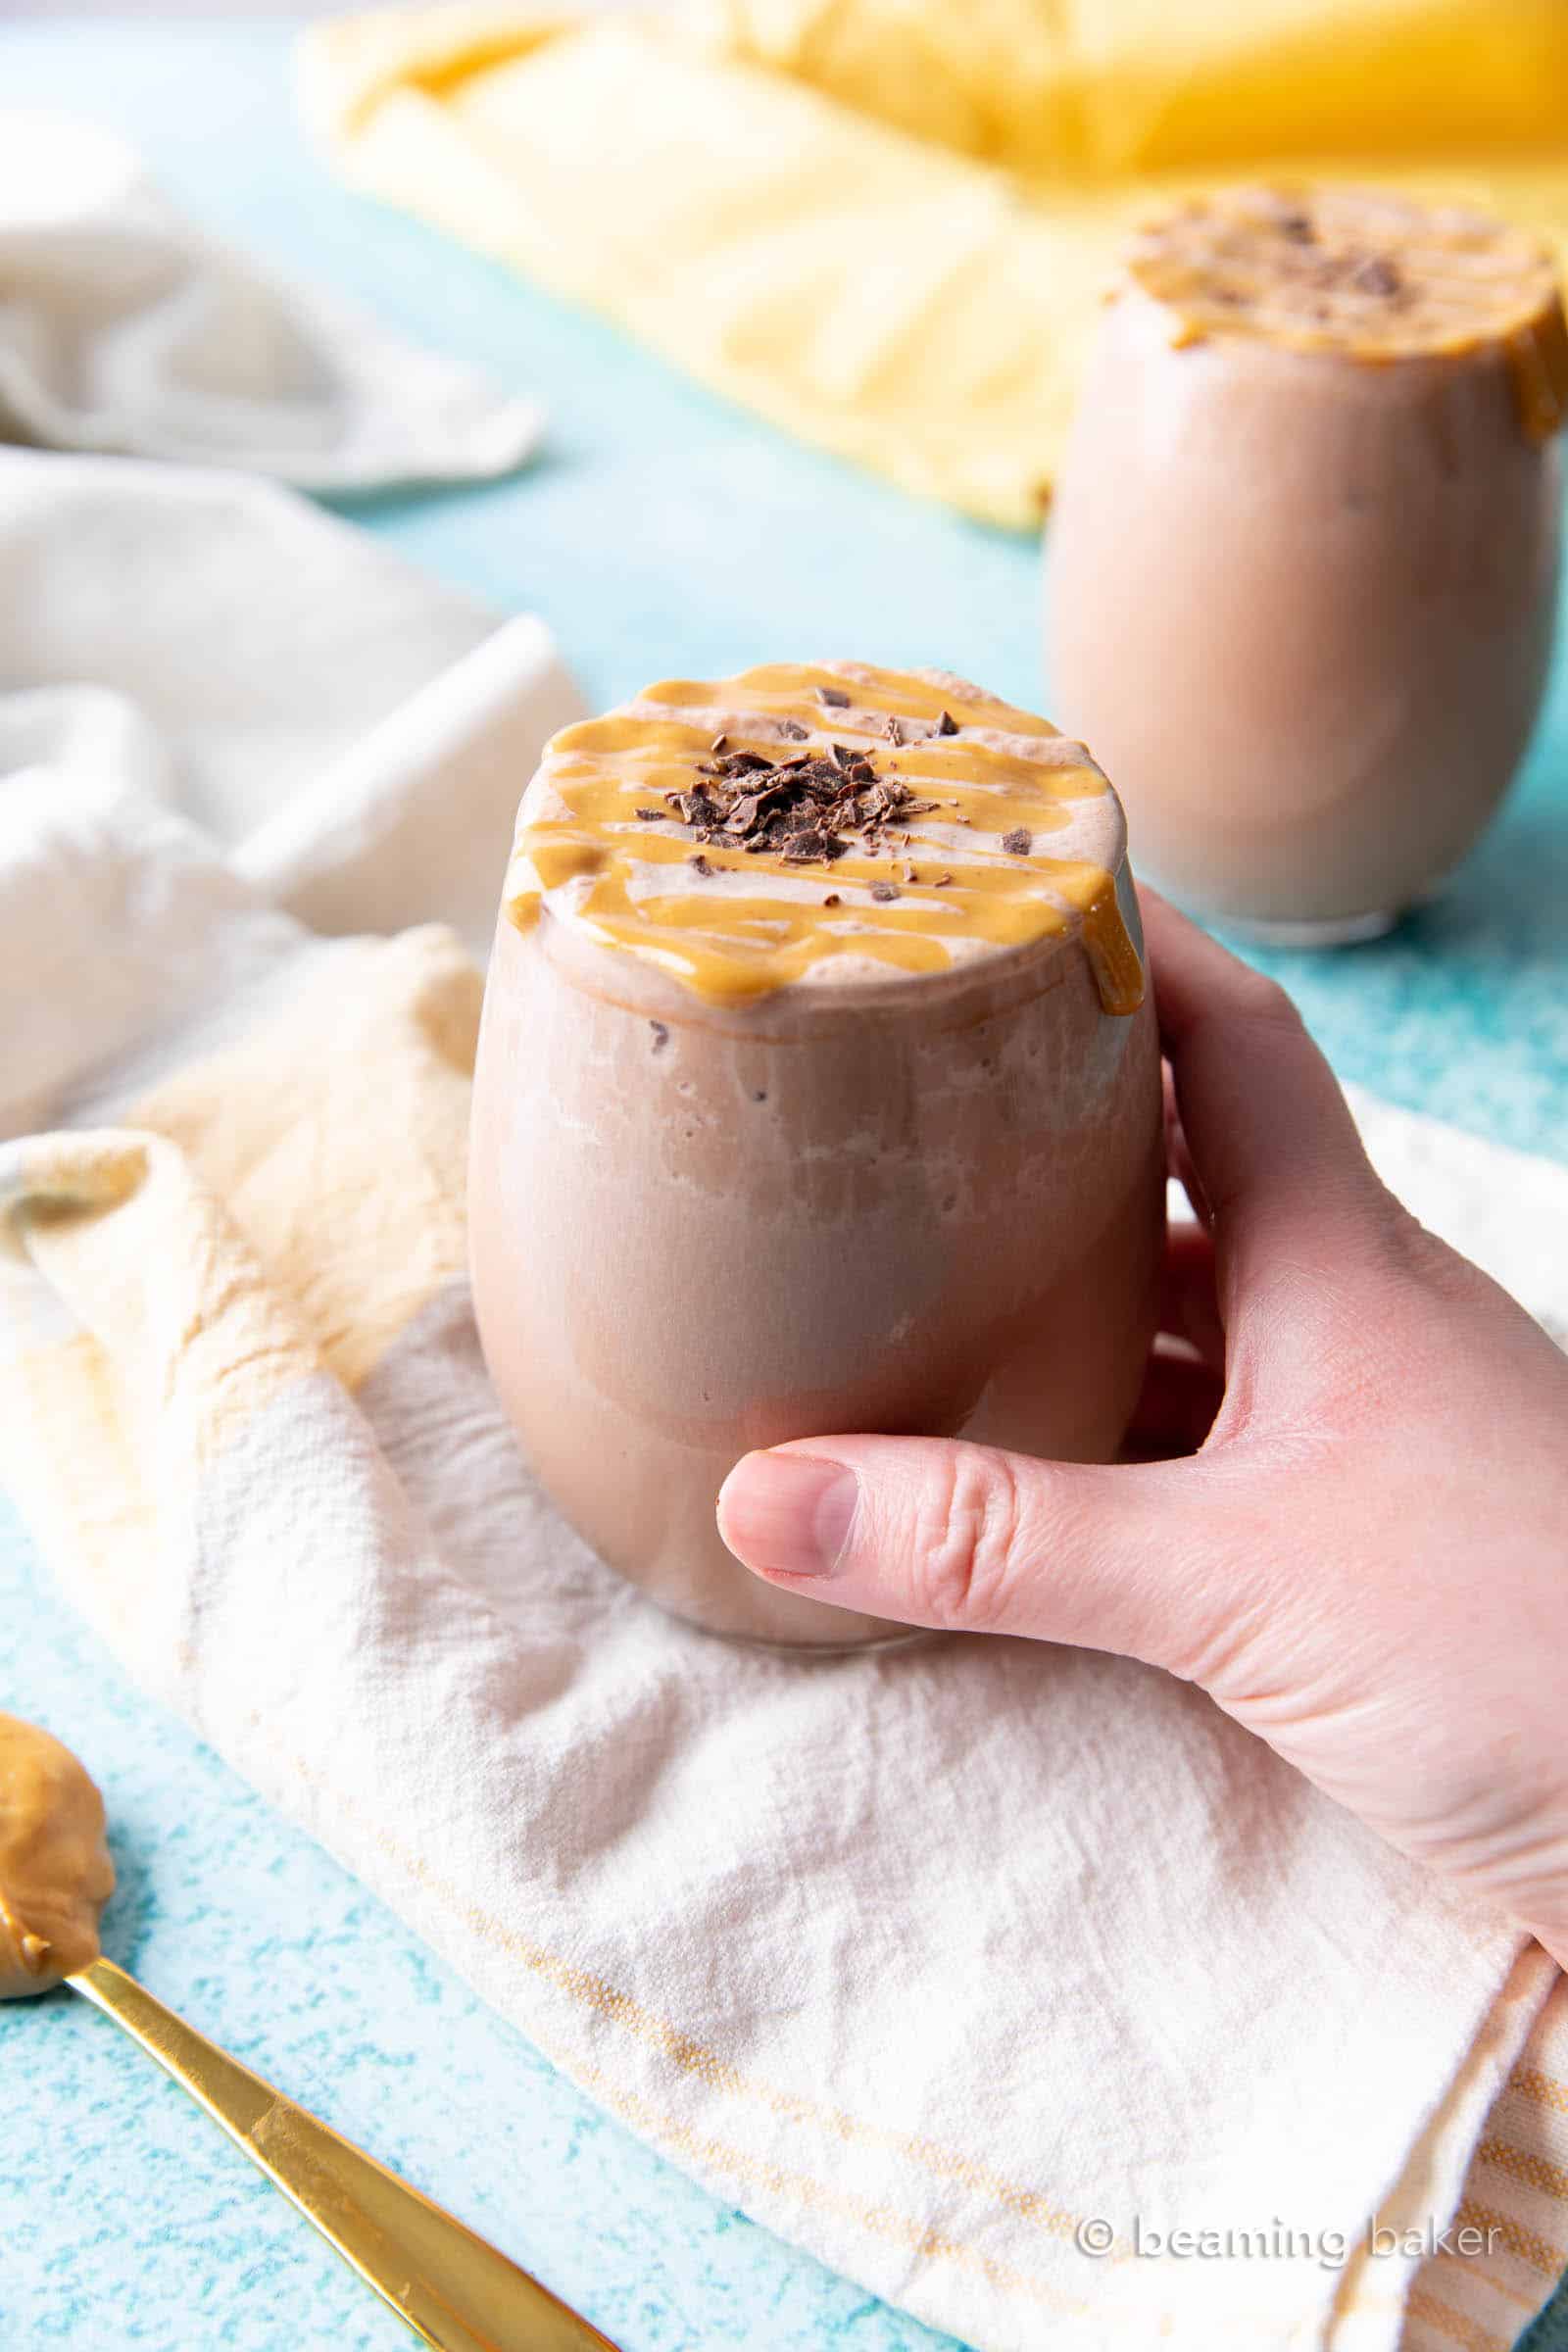 Chocolate Peanut Butter Protein Shake Recipe: this Vegan + High-Protein shake recipe requires just 5 ingredients & 5 minutes to make! Creamy peanut butter & chocolate YUM. #ProteinShake #Protein #Vegan #Chocolate #PeanutButter | Recipe at BeamingBaker.com